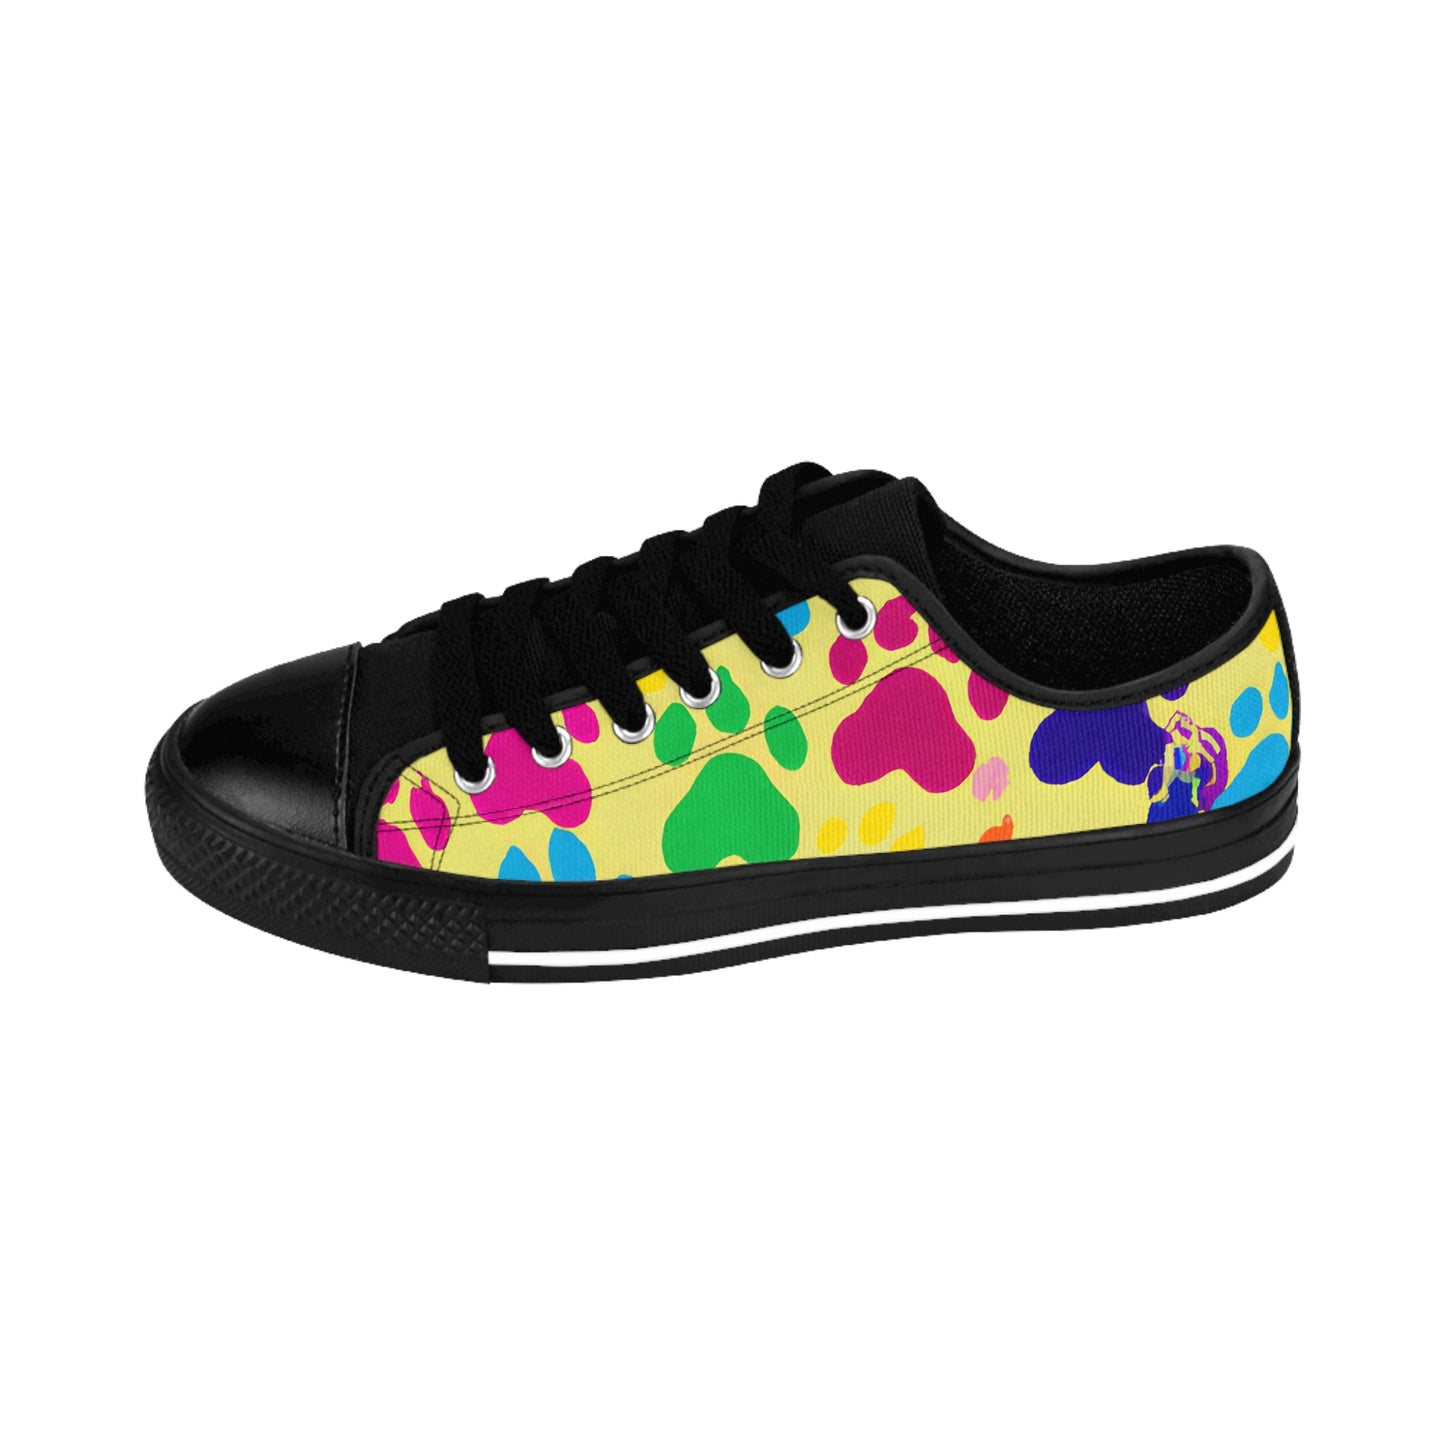 Gabrielle Chaussures - Paw Print - Low-Top